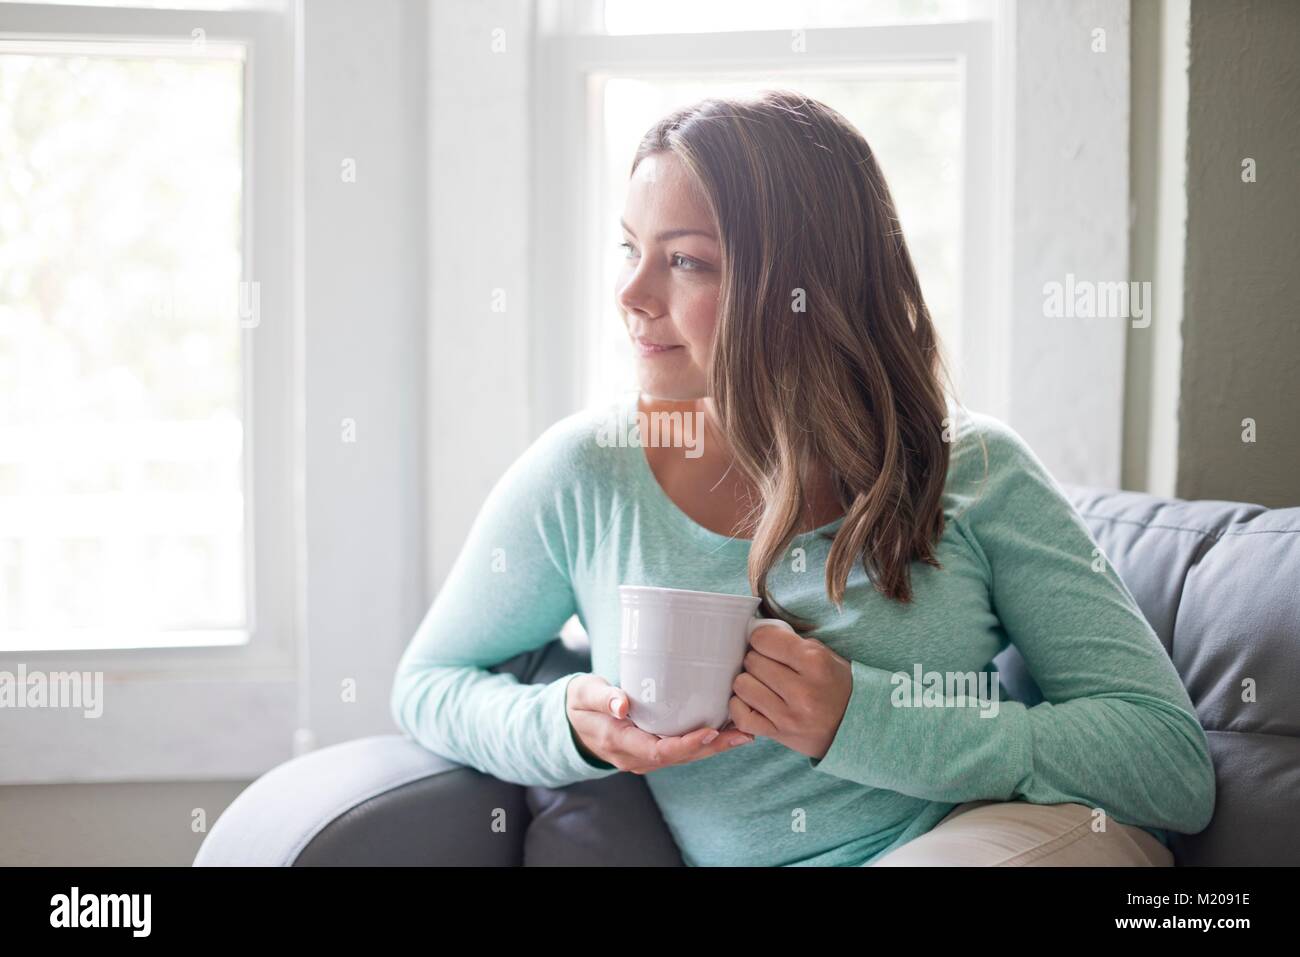 Young woman holding a mug and looking away. Stock Photo